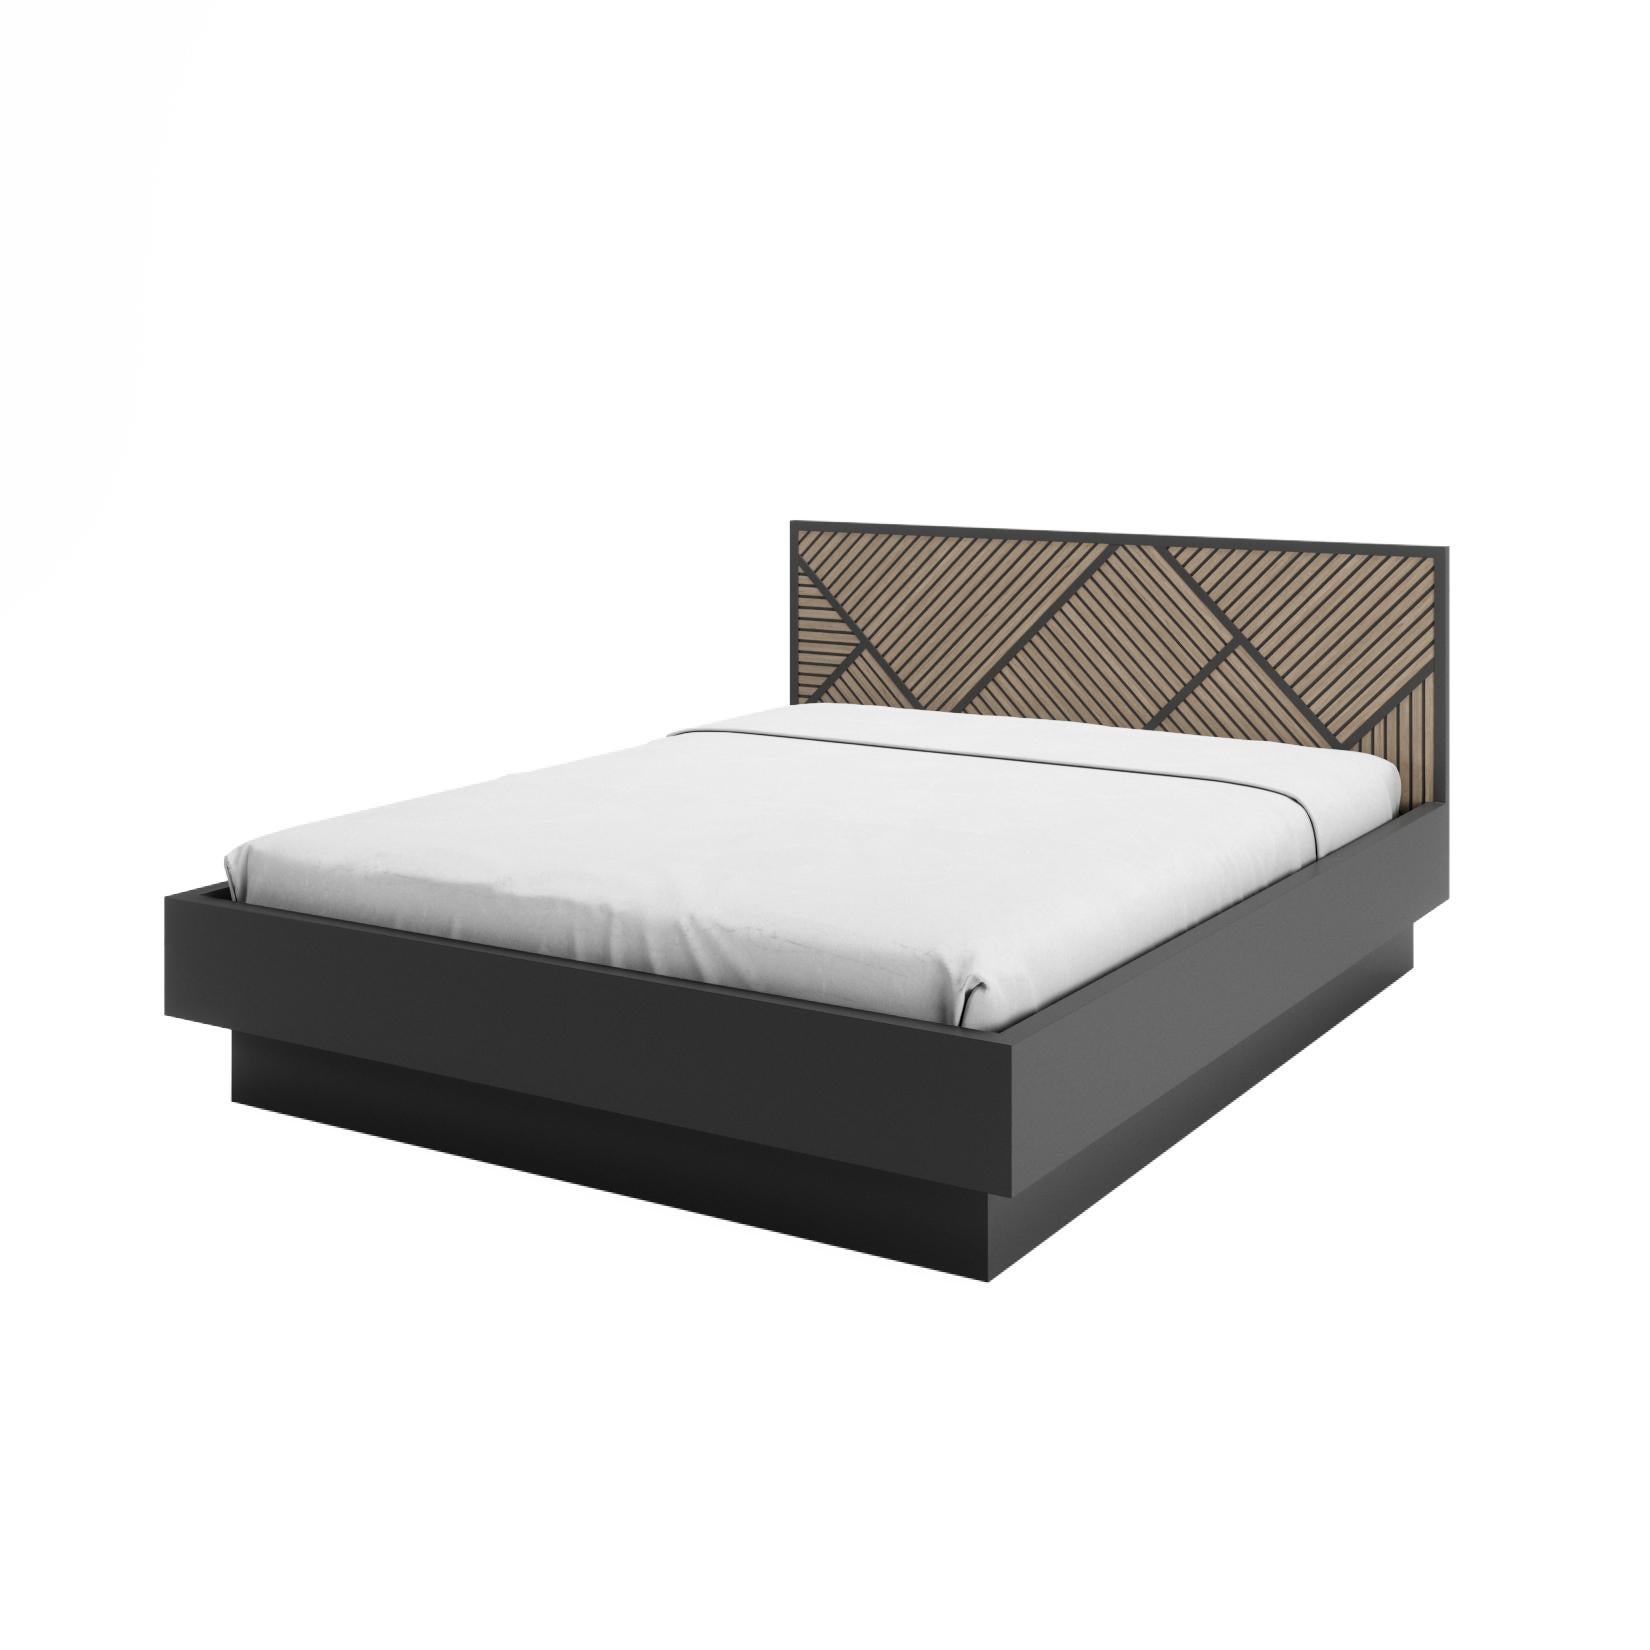 Portuguese Slide Bed with Storage for Mattress For Sale